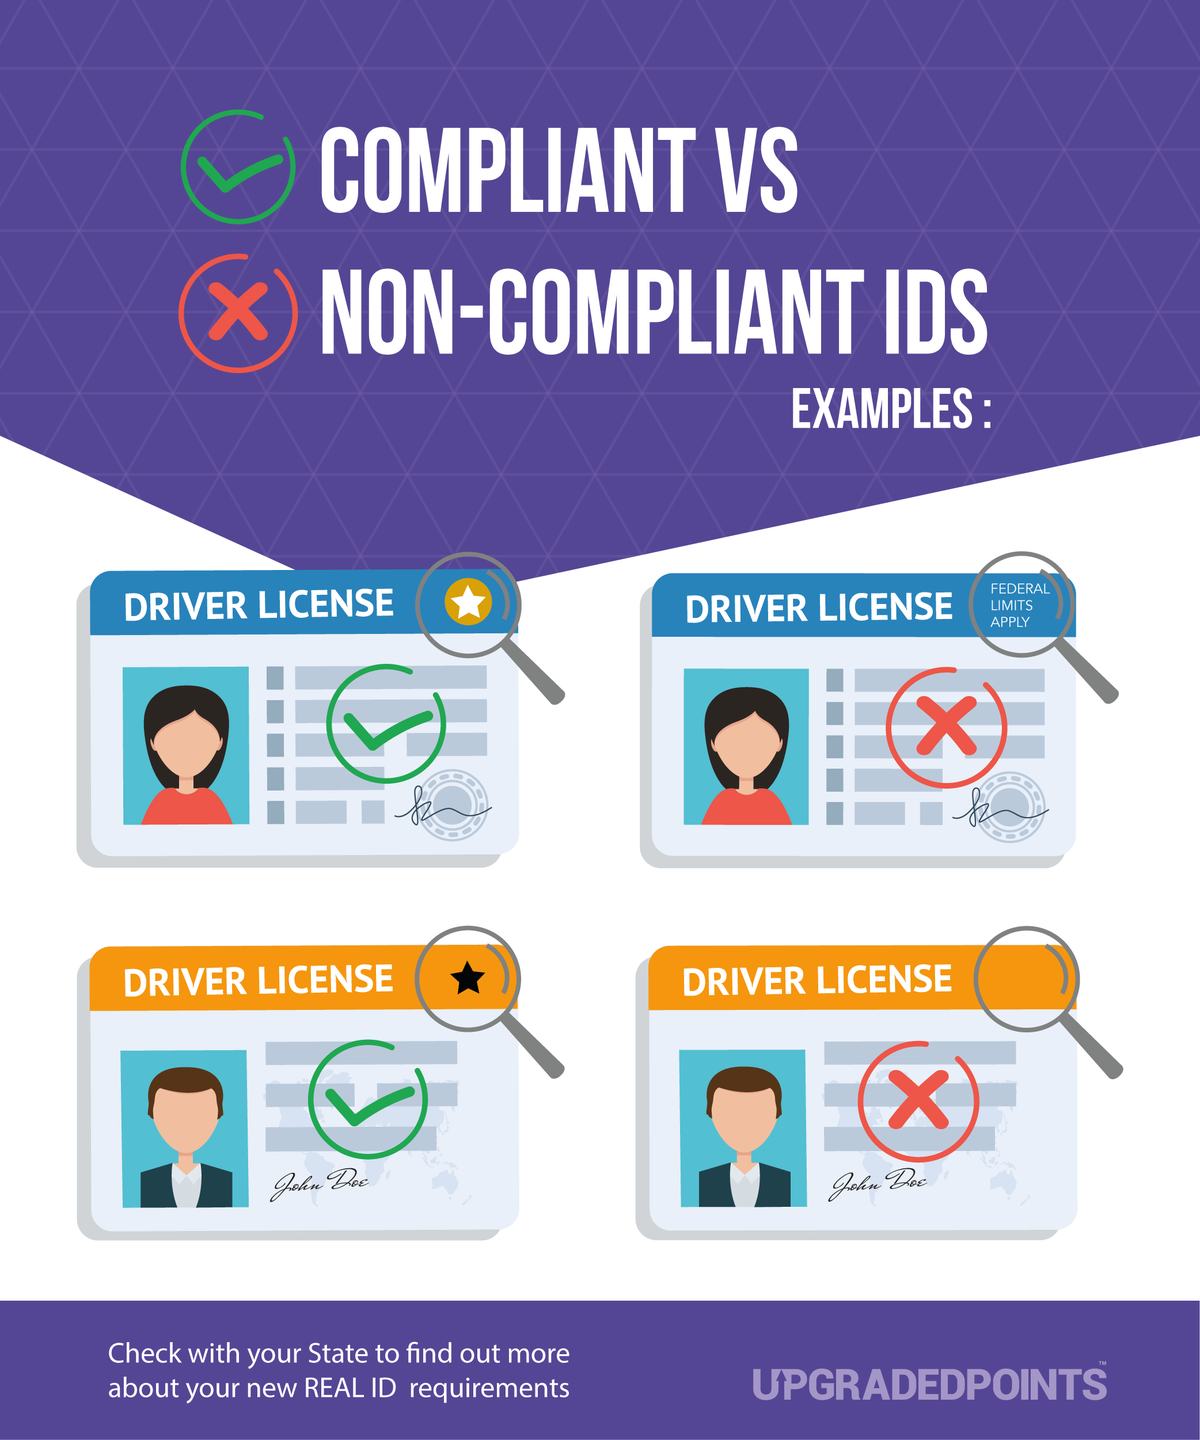 REAL ID Compliant vs Non-Compliant - Upgraded Points